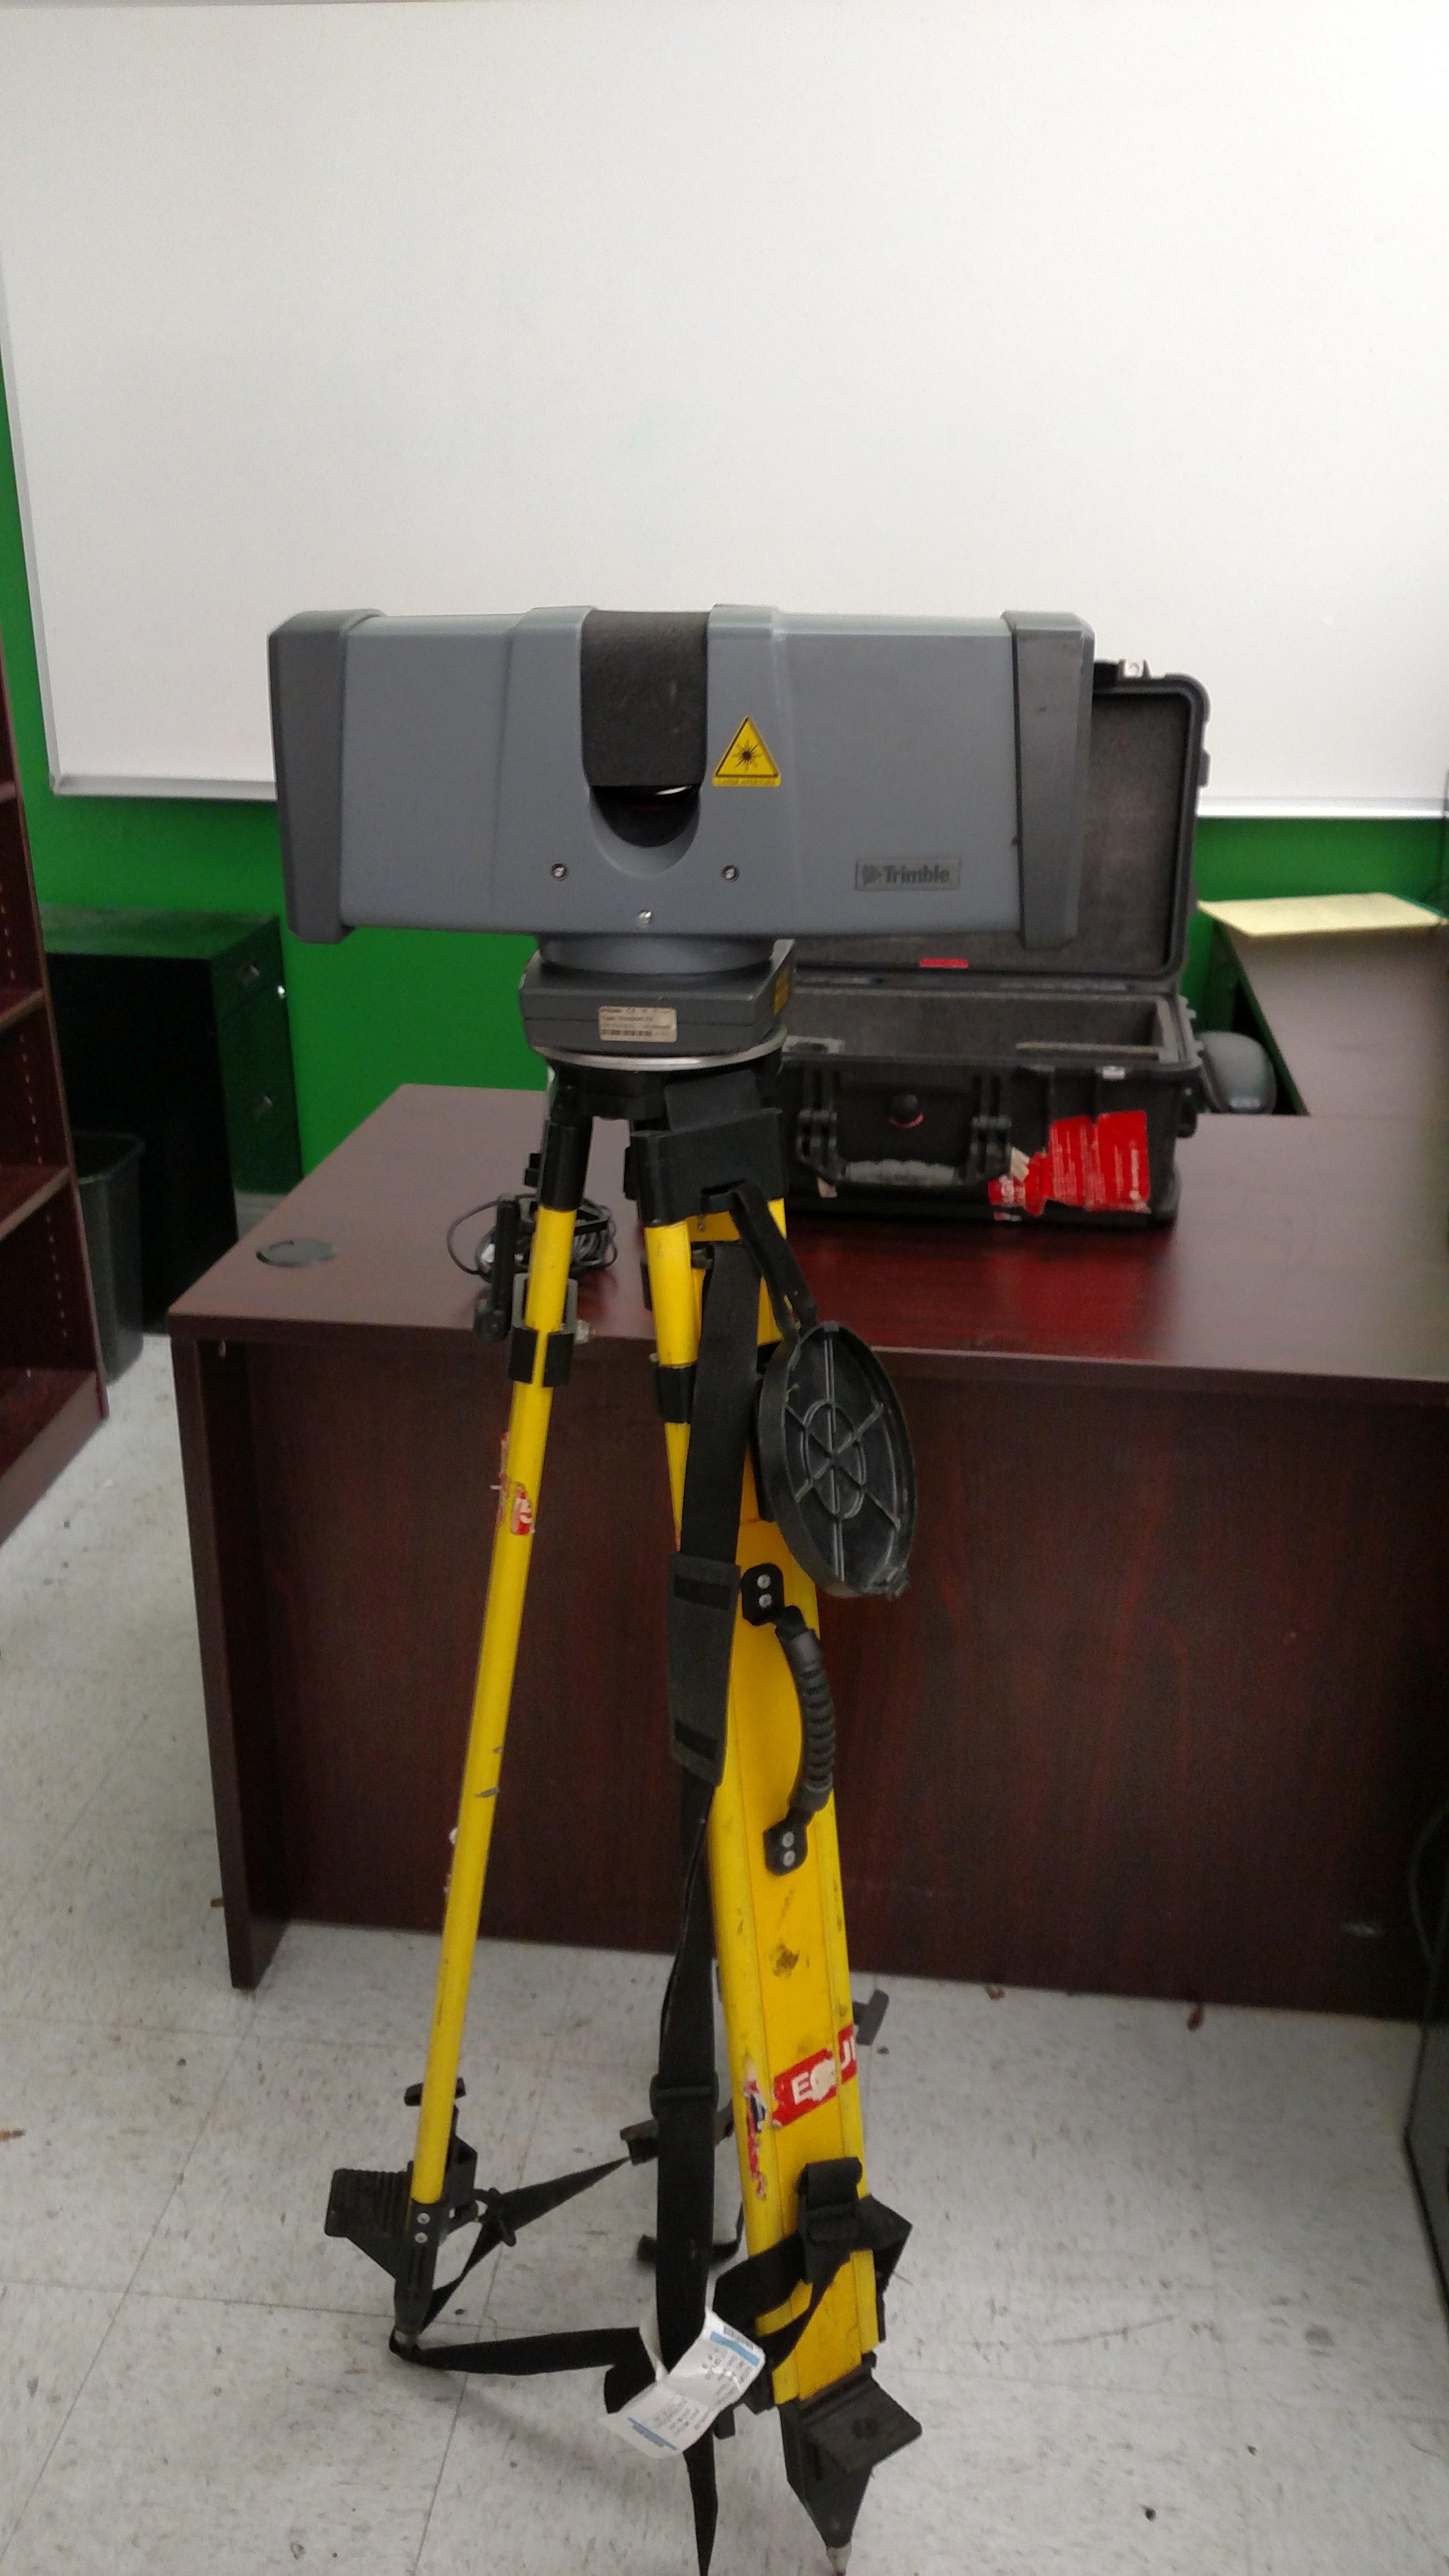 Trimble TFX1002 Scanning System, Full Case, Cables, Battery Kit/located in Mobile, AL